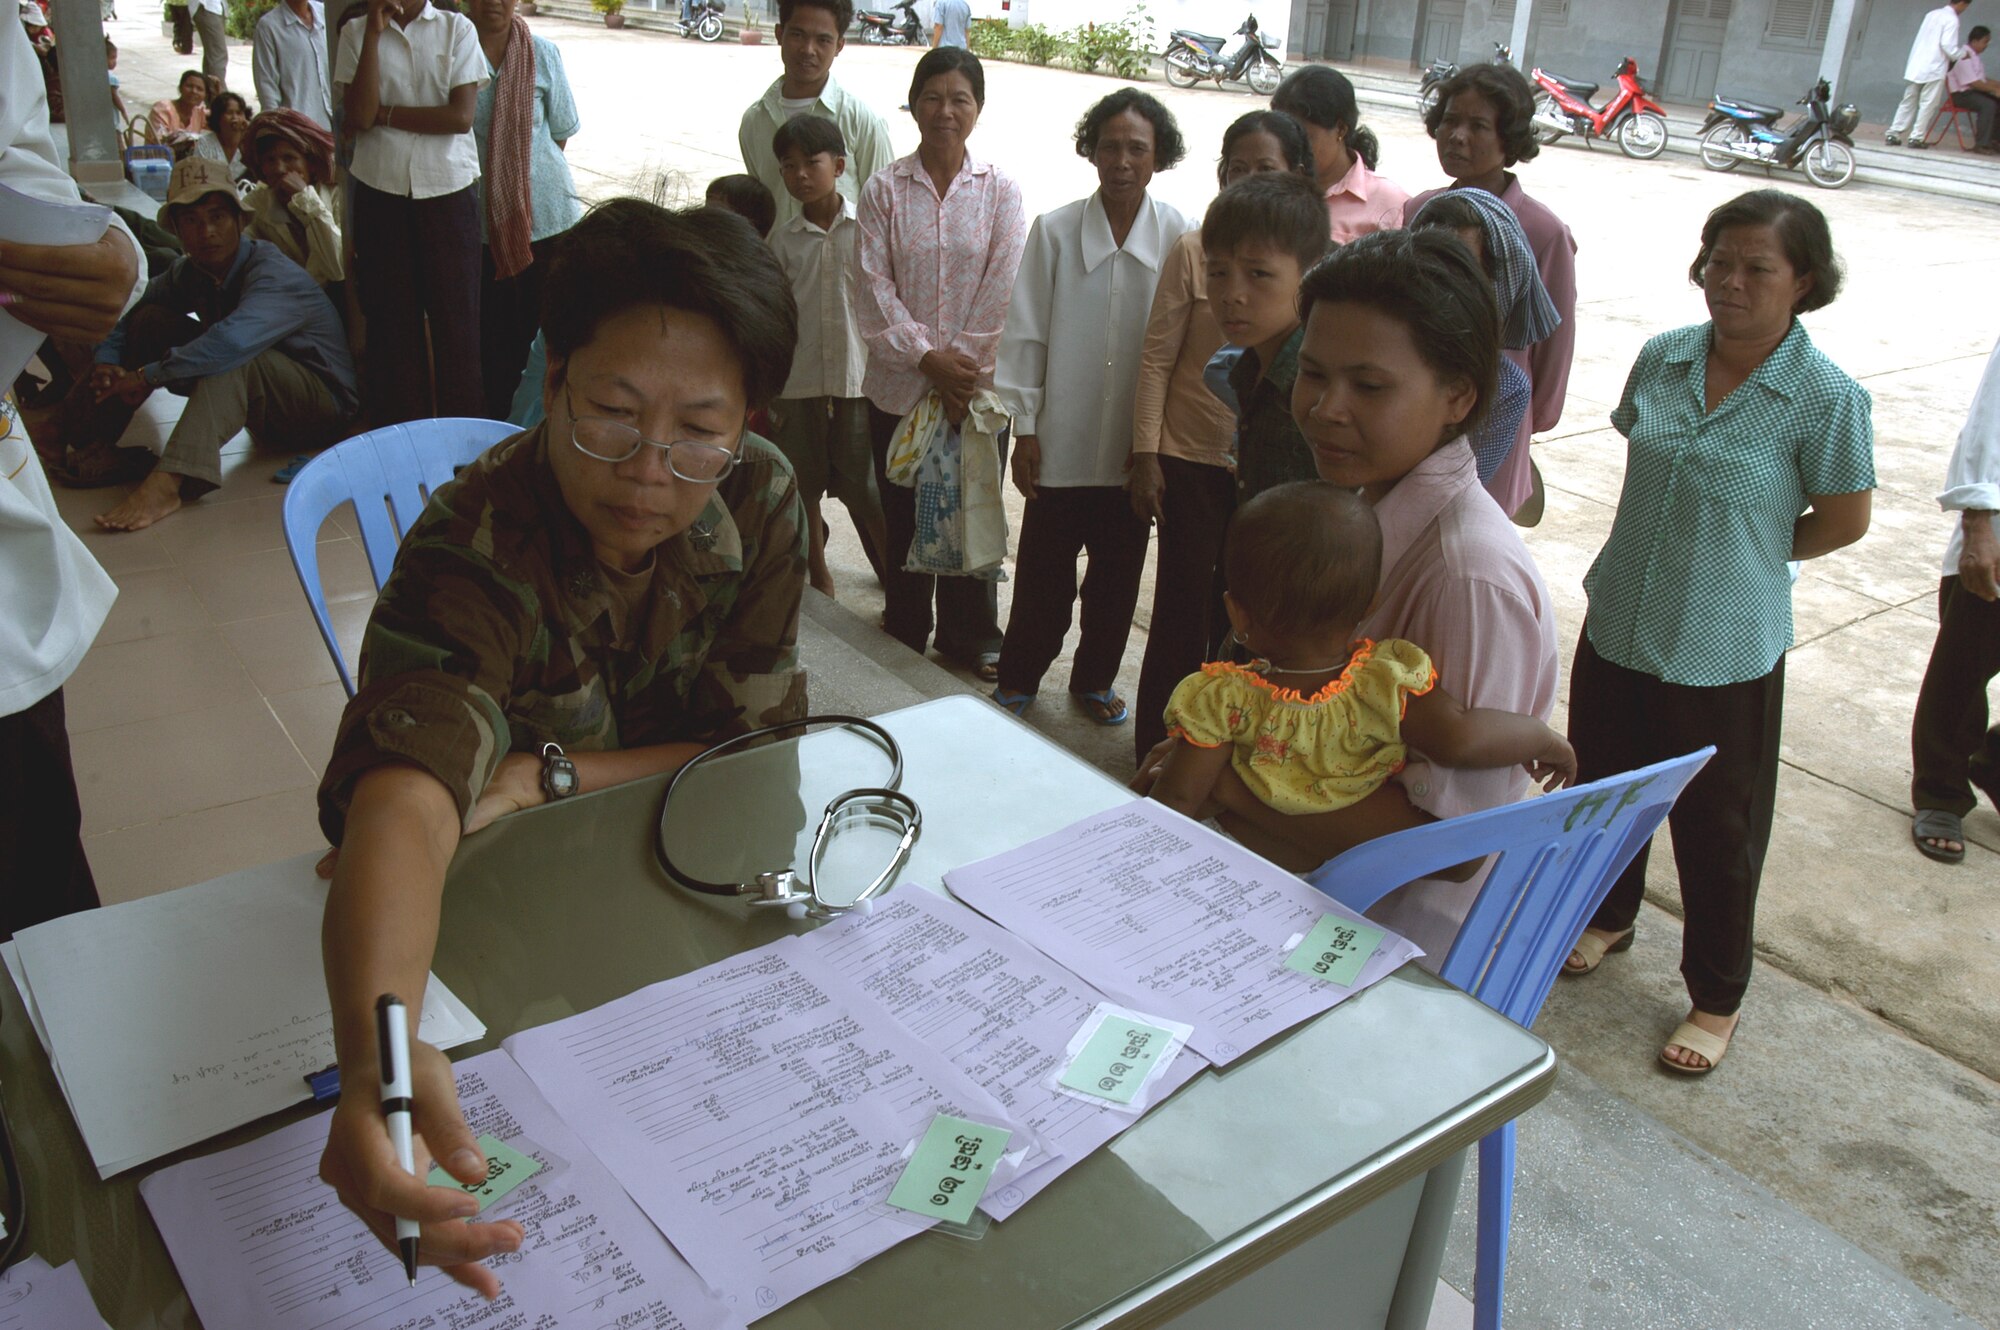 KEP, Cambodia -- Lt. Col. Diep Duong reviews a patient's screening paperwork as she assesses possible patients in a hospital compound here.  Colonel Duong is the leader of a 20-person blast resuscitation and victim assistance team on a two-week humanitarian mission here.  Colonel Duong is a nurse assigned to Detachment 2 of the 13th Air Force international health specialist program at Hickam Air Force Base, Hawaii.  (U.S. Air Force photo by Master Sgt. Adam Johnston)